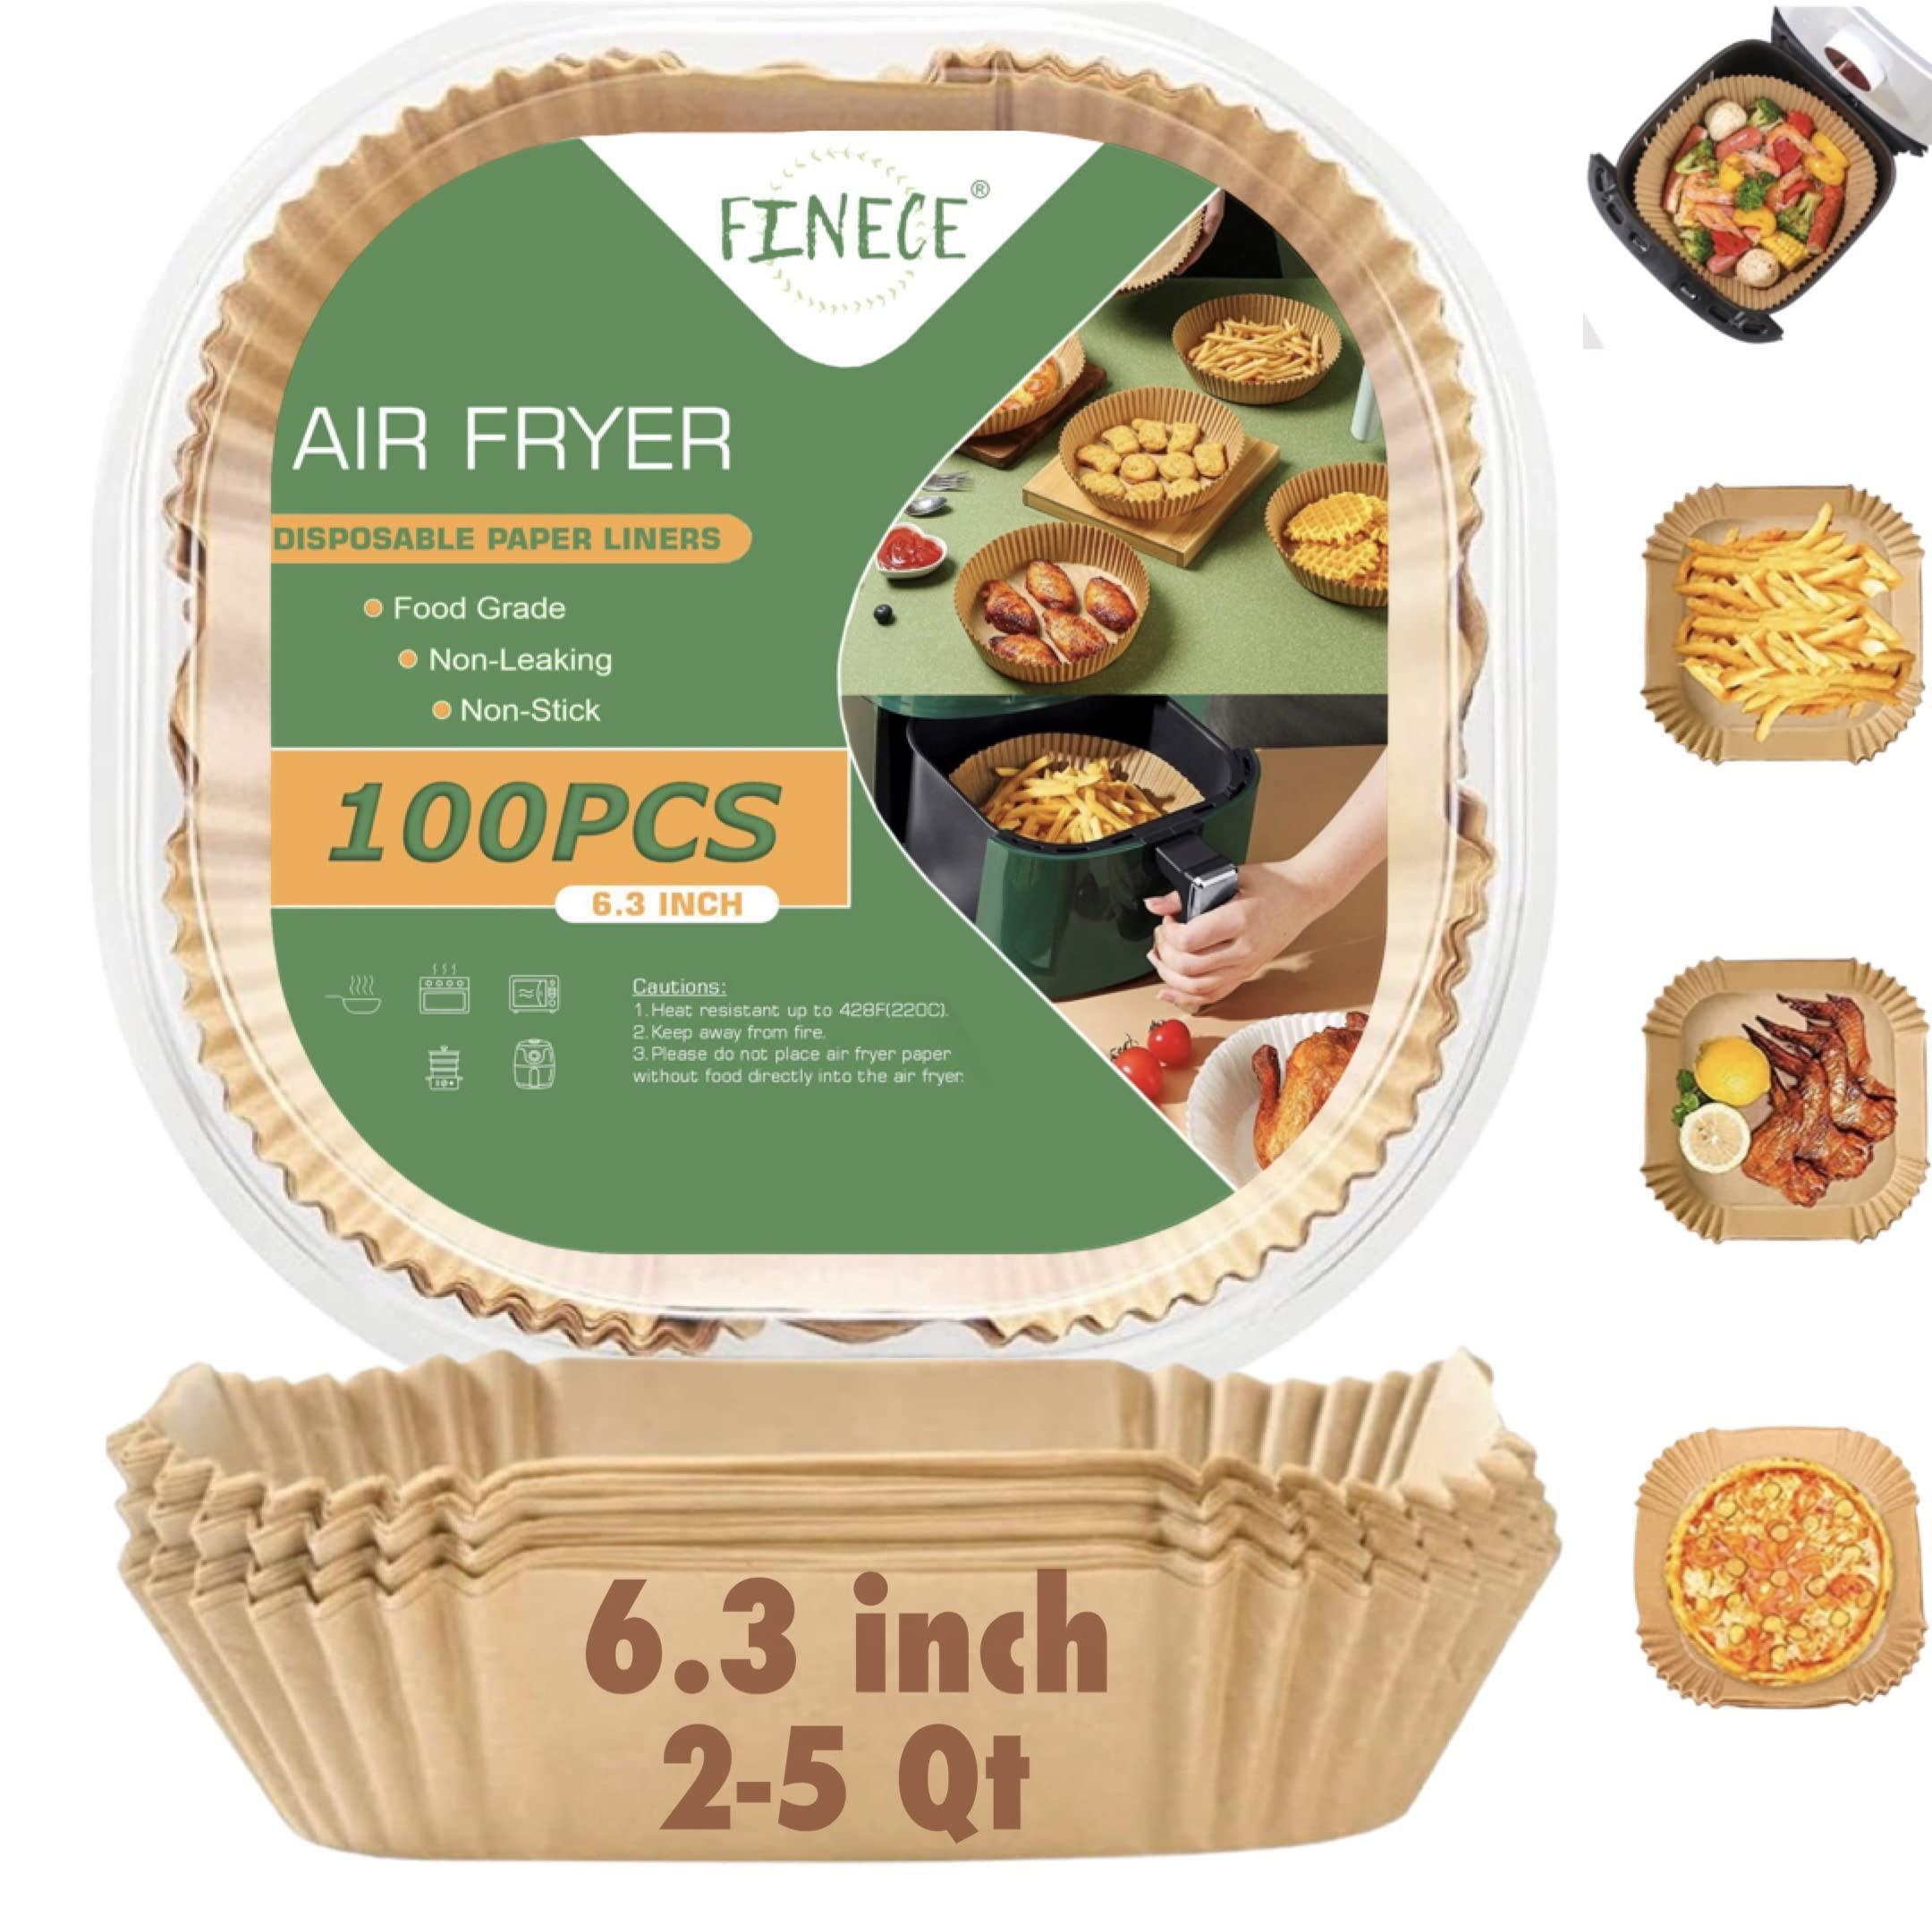 FINECE finece air fryer liners square, 100pcs for 2 to 5 qt air fryer  disposable paper liner, 6.3 inch unbleached non-stick oil-proo